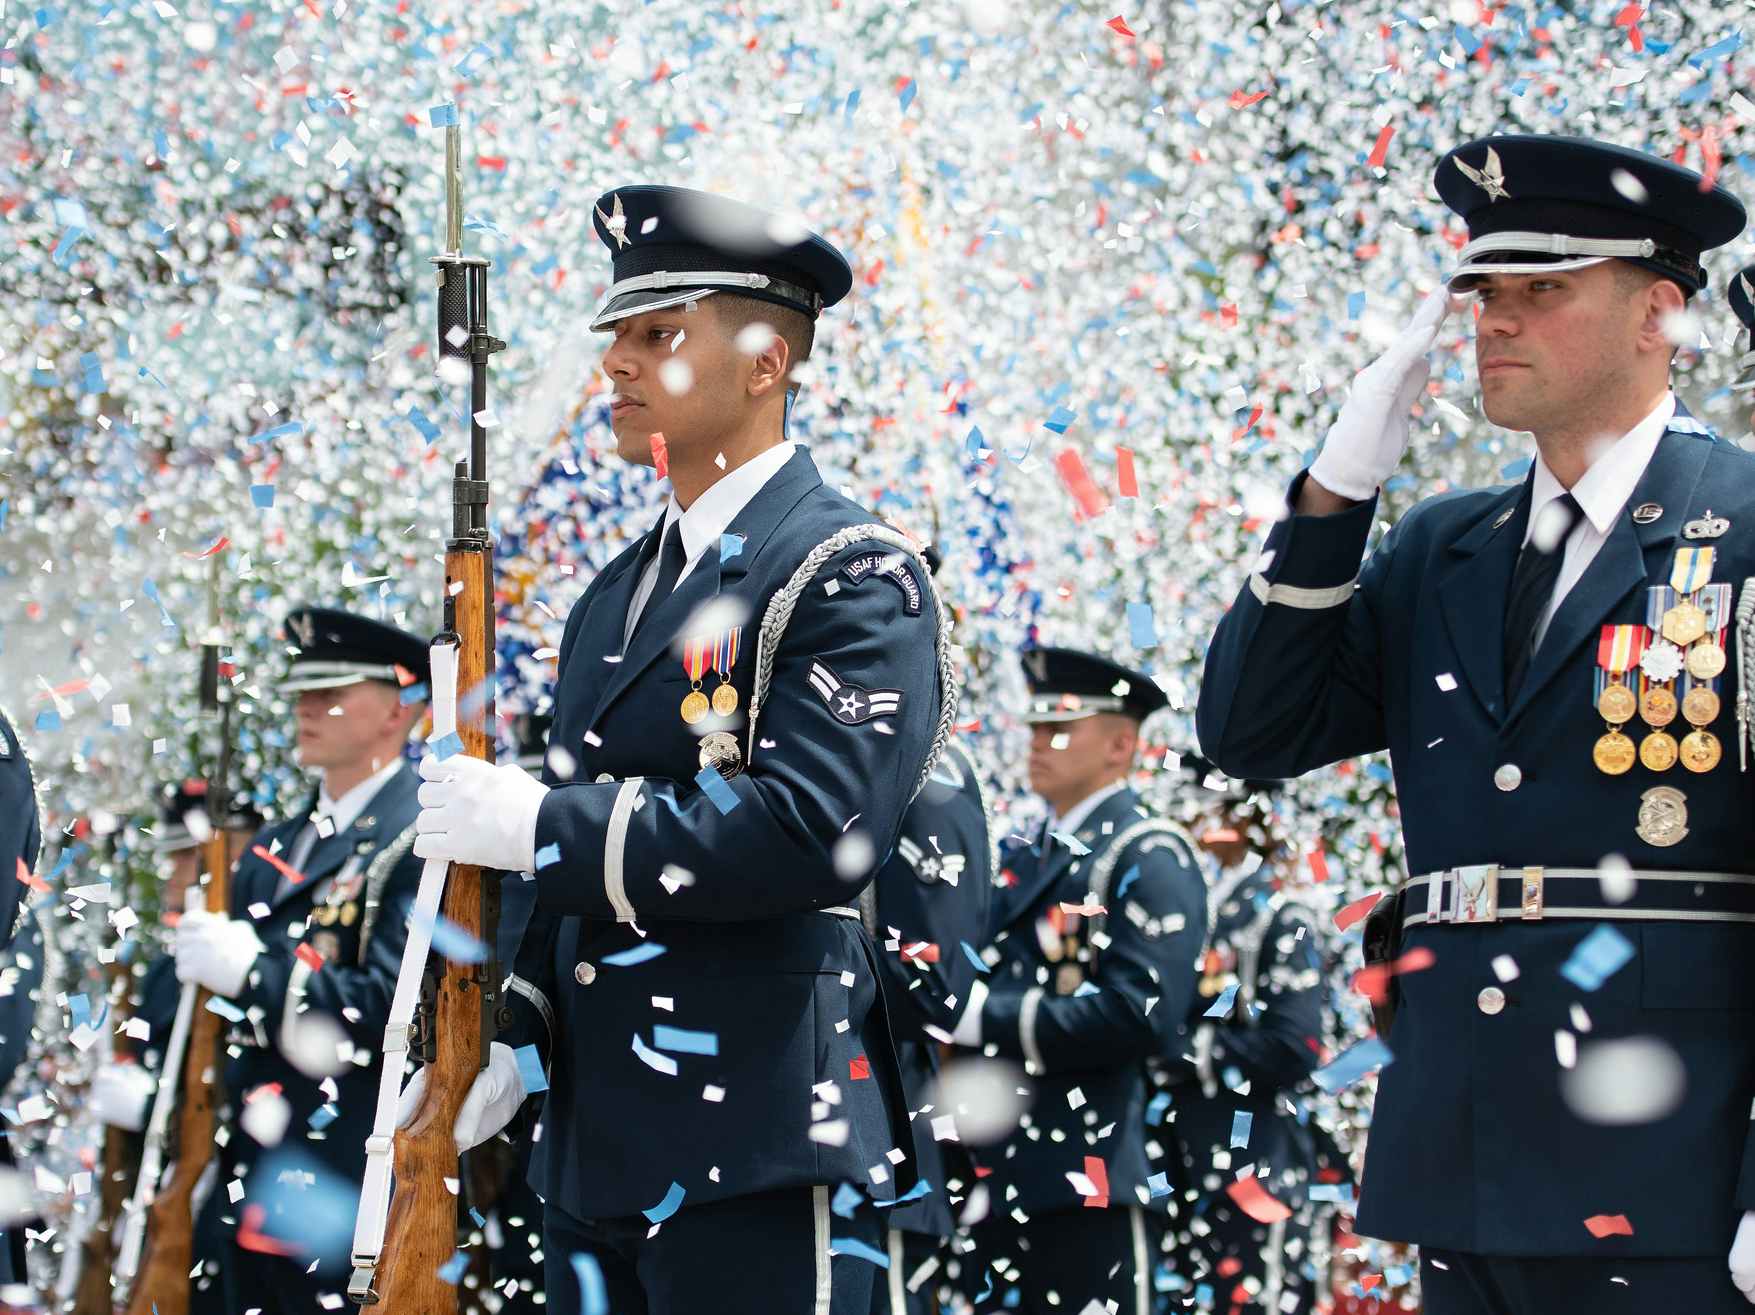 US Air Force soldiers dressed in uniform with confetti flying around them